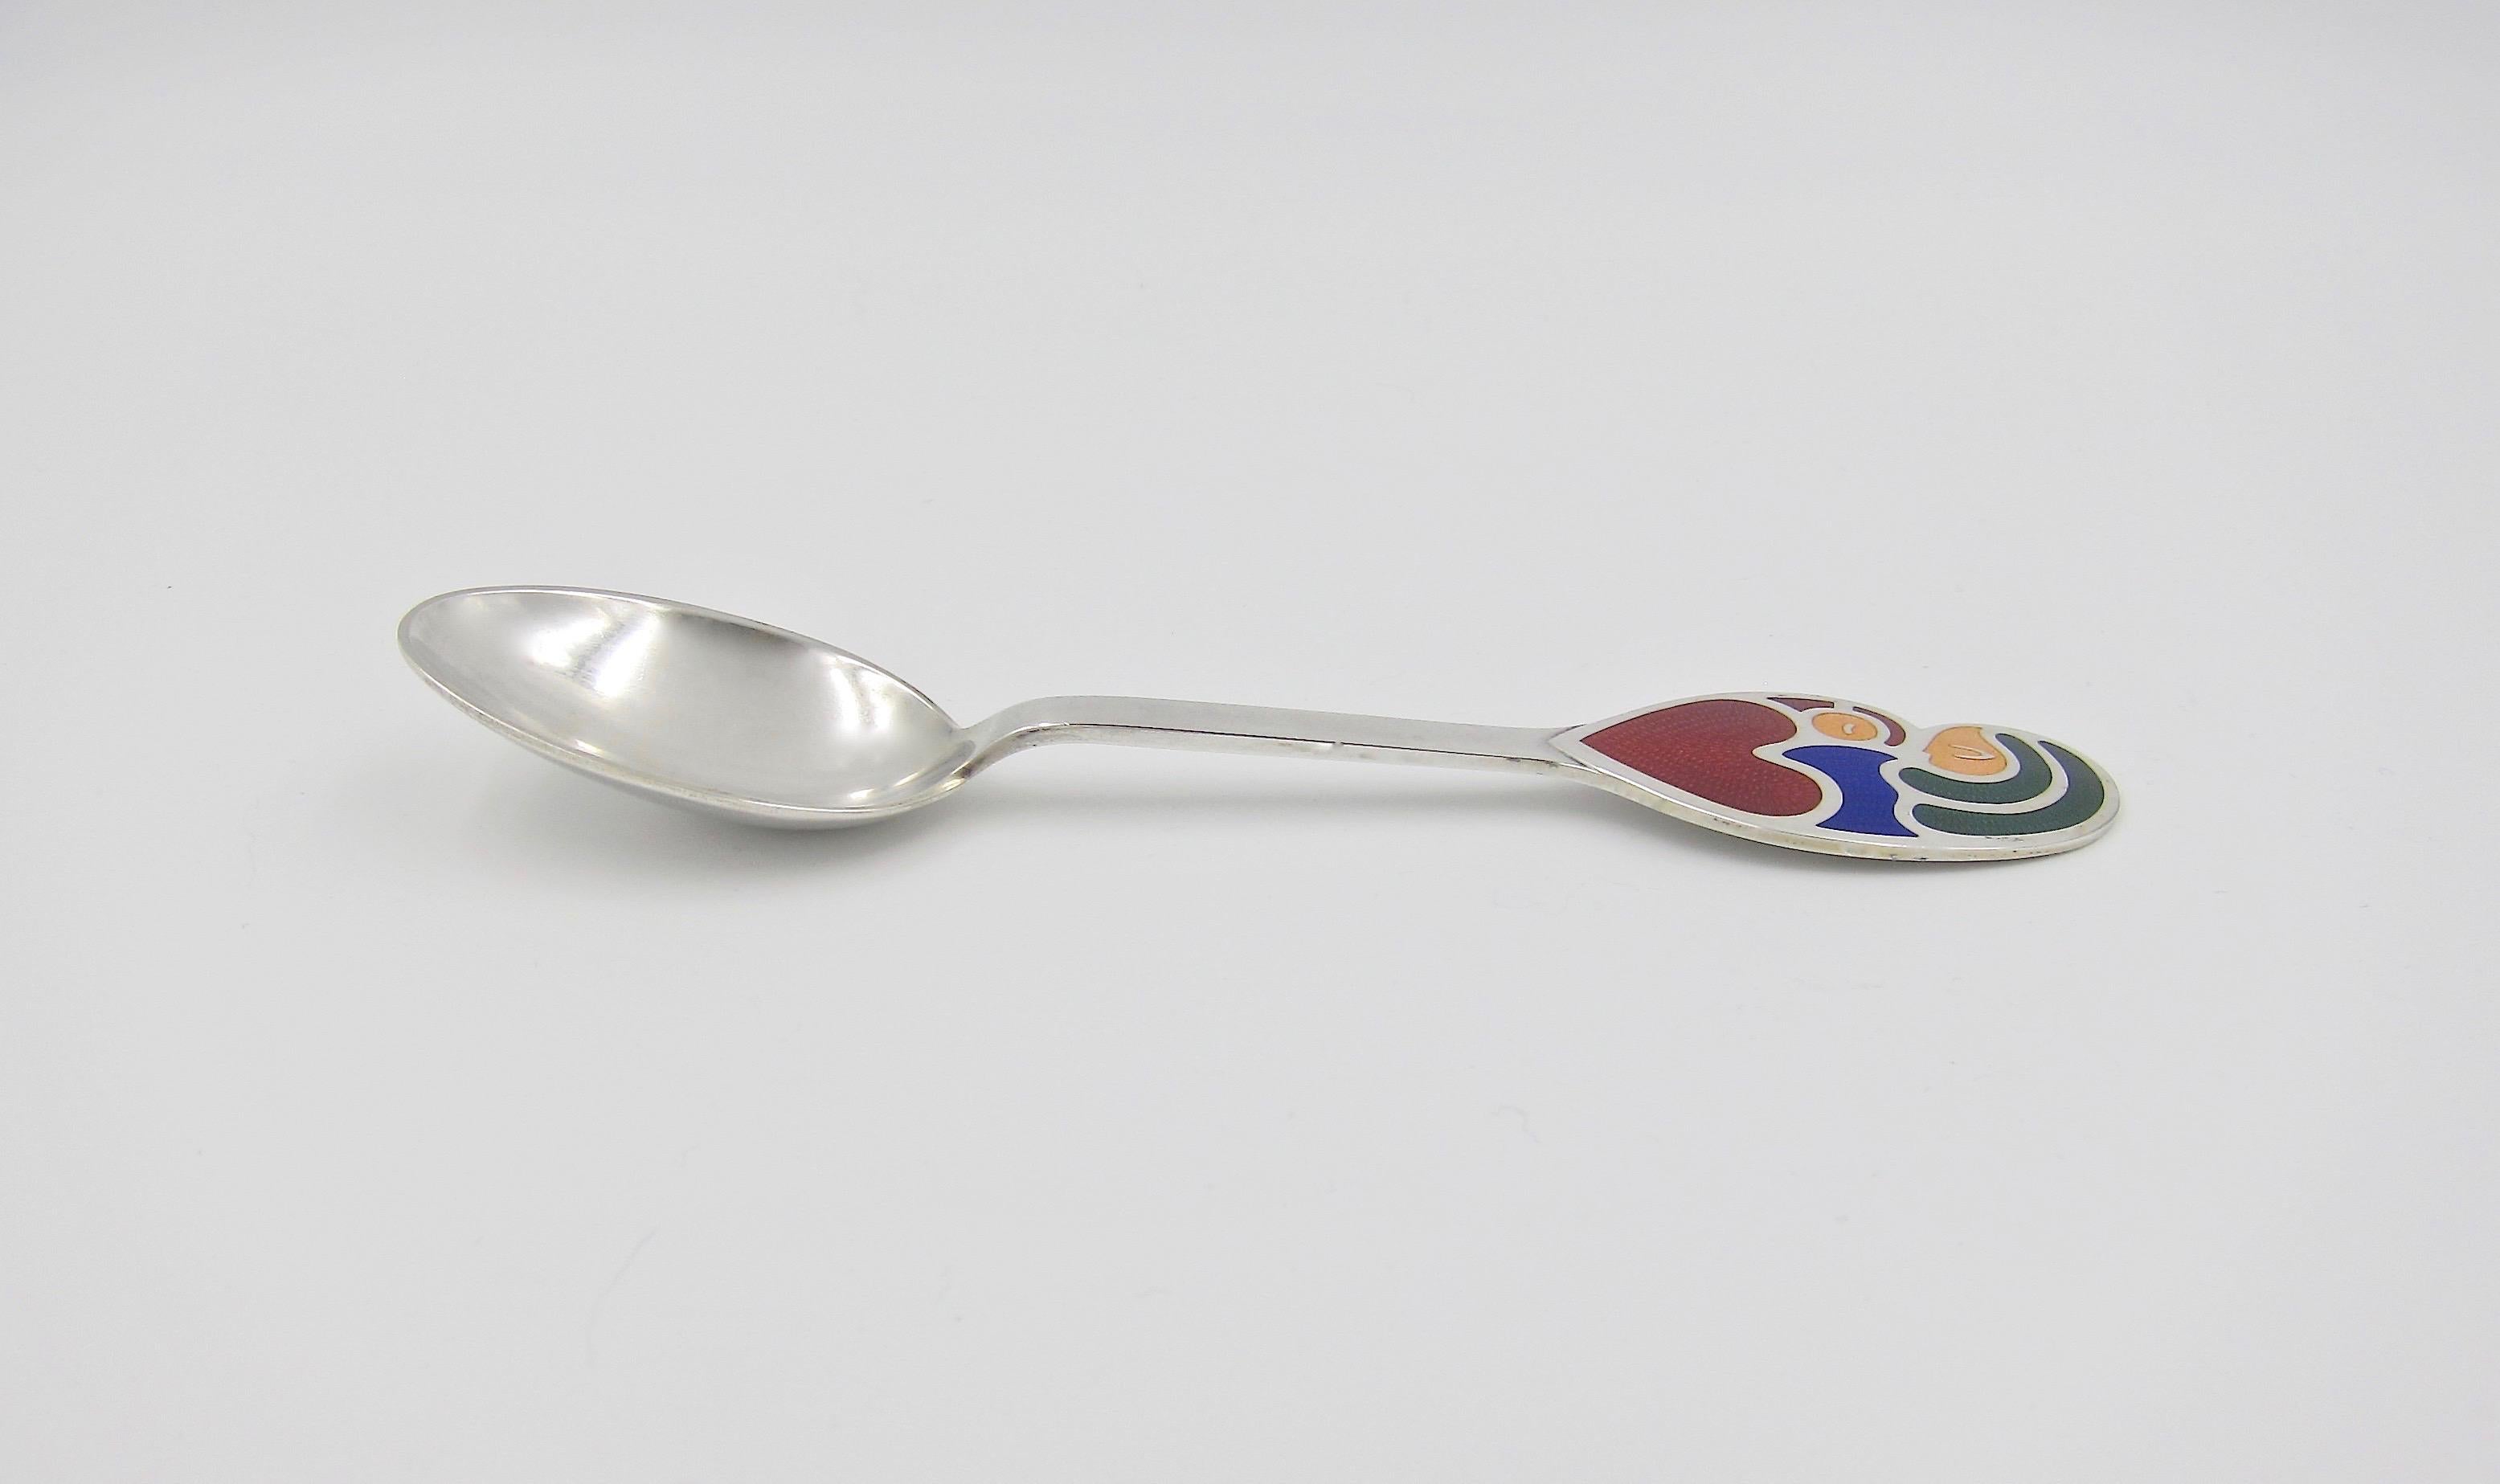 1968 Anton Michelsen Silver and Enamel Christmas Spoon by Henry Heerup 1